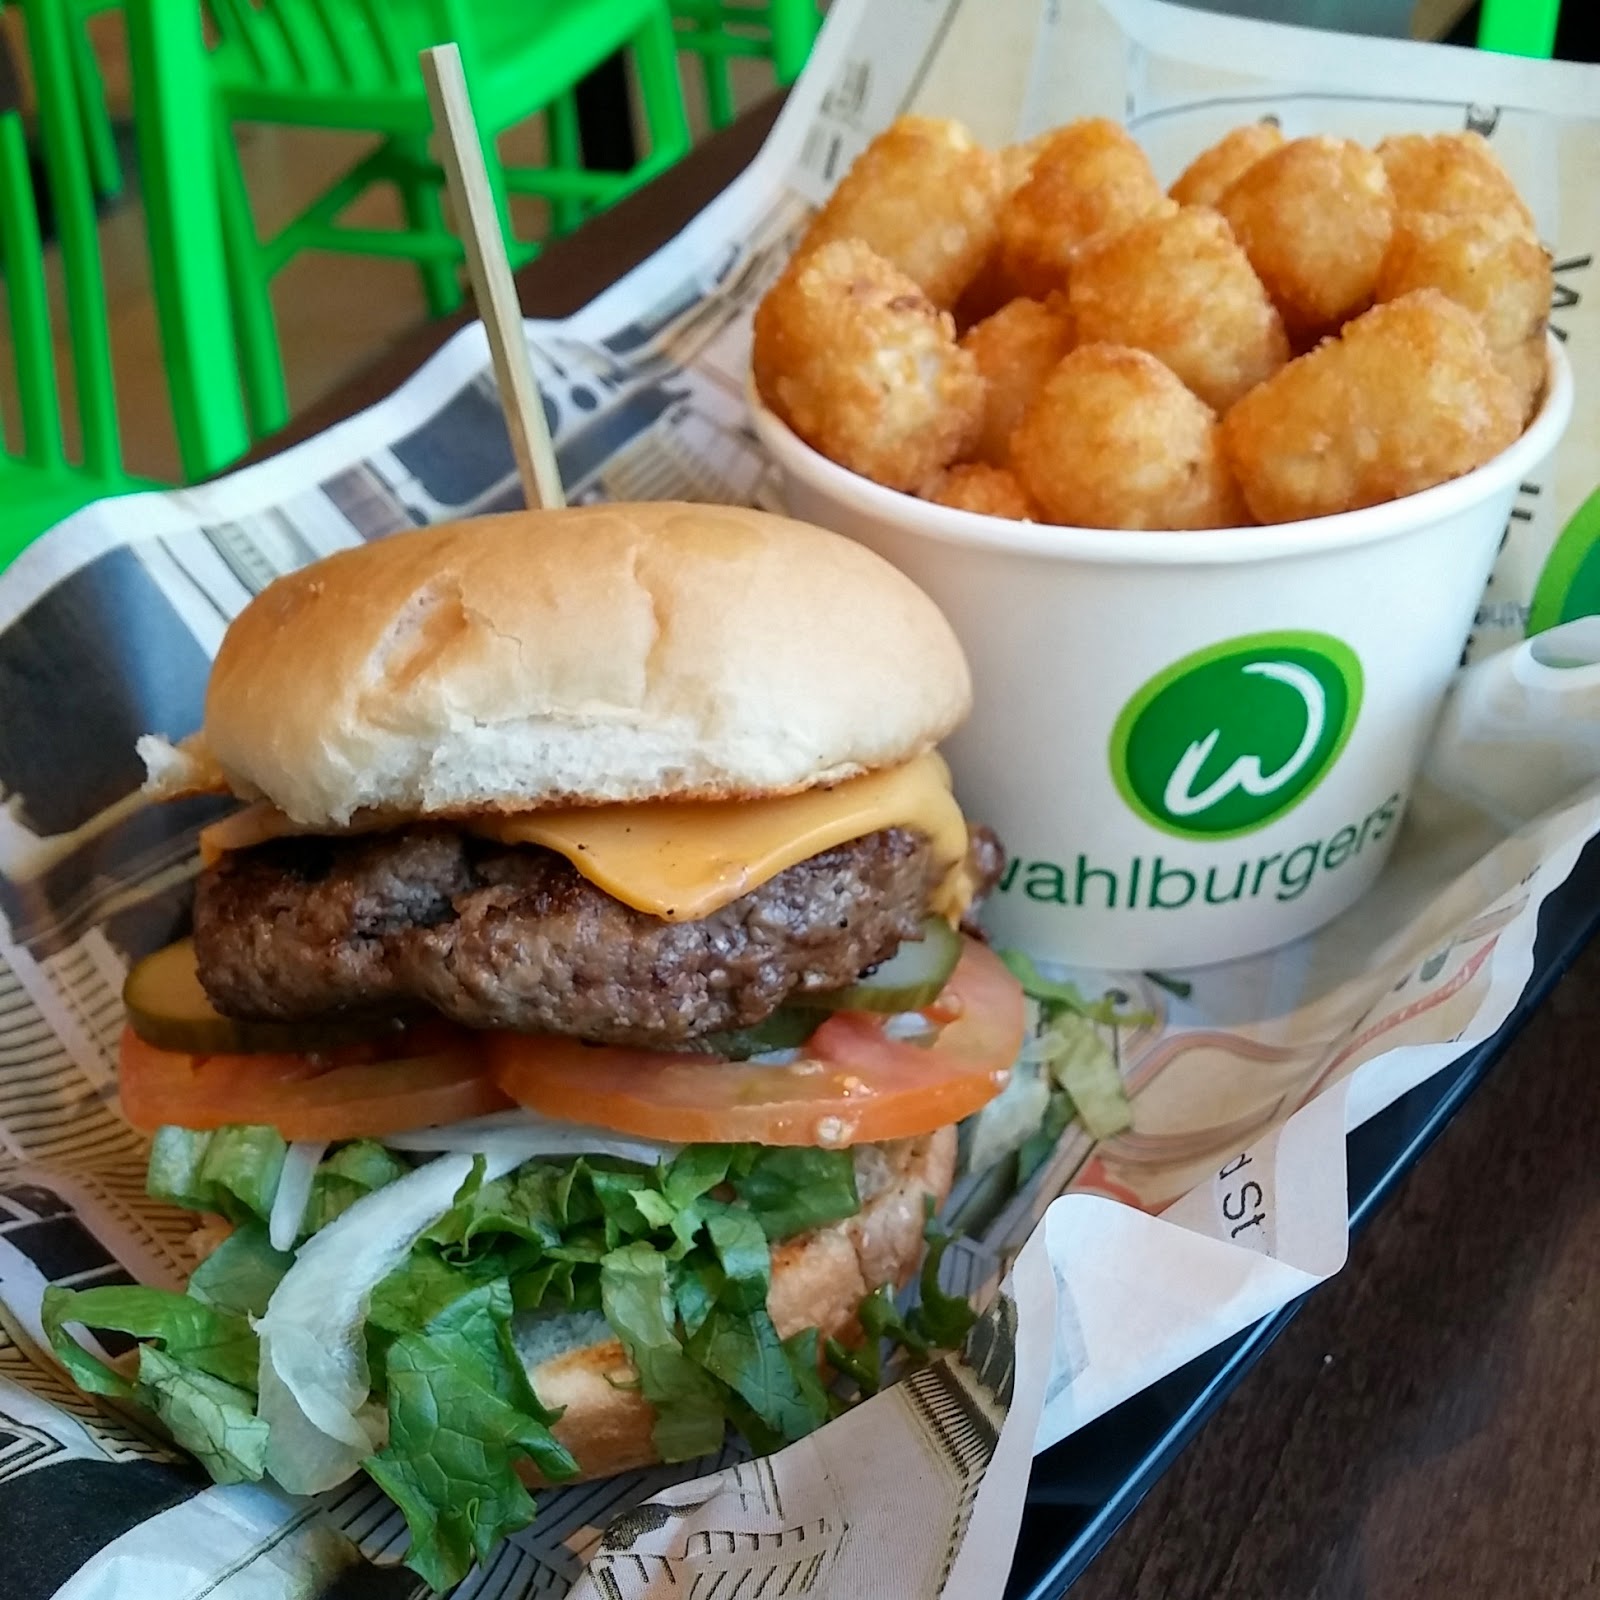 Starving Foodie: Review - Wahlburgers Open in TO